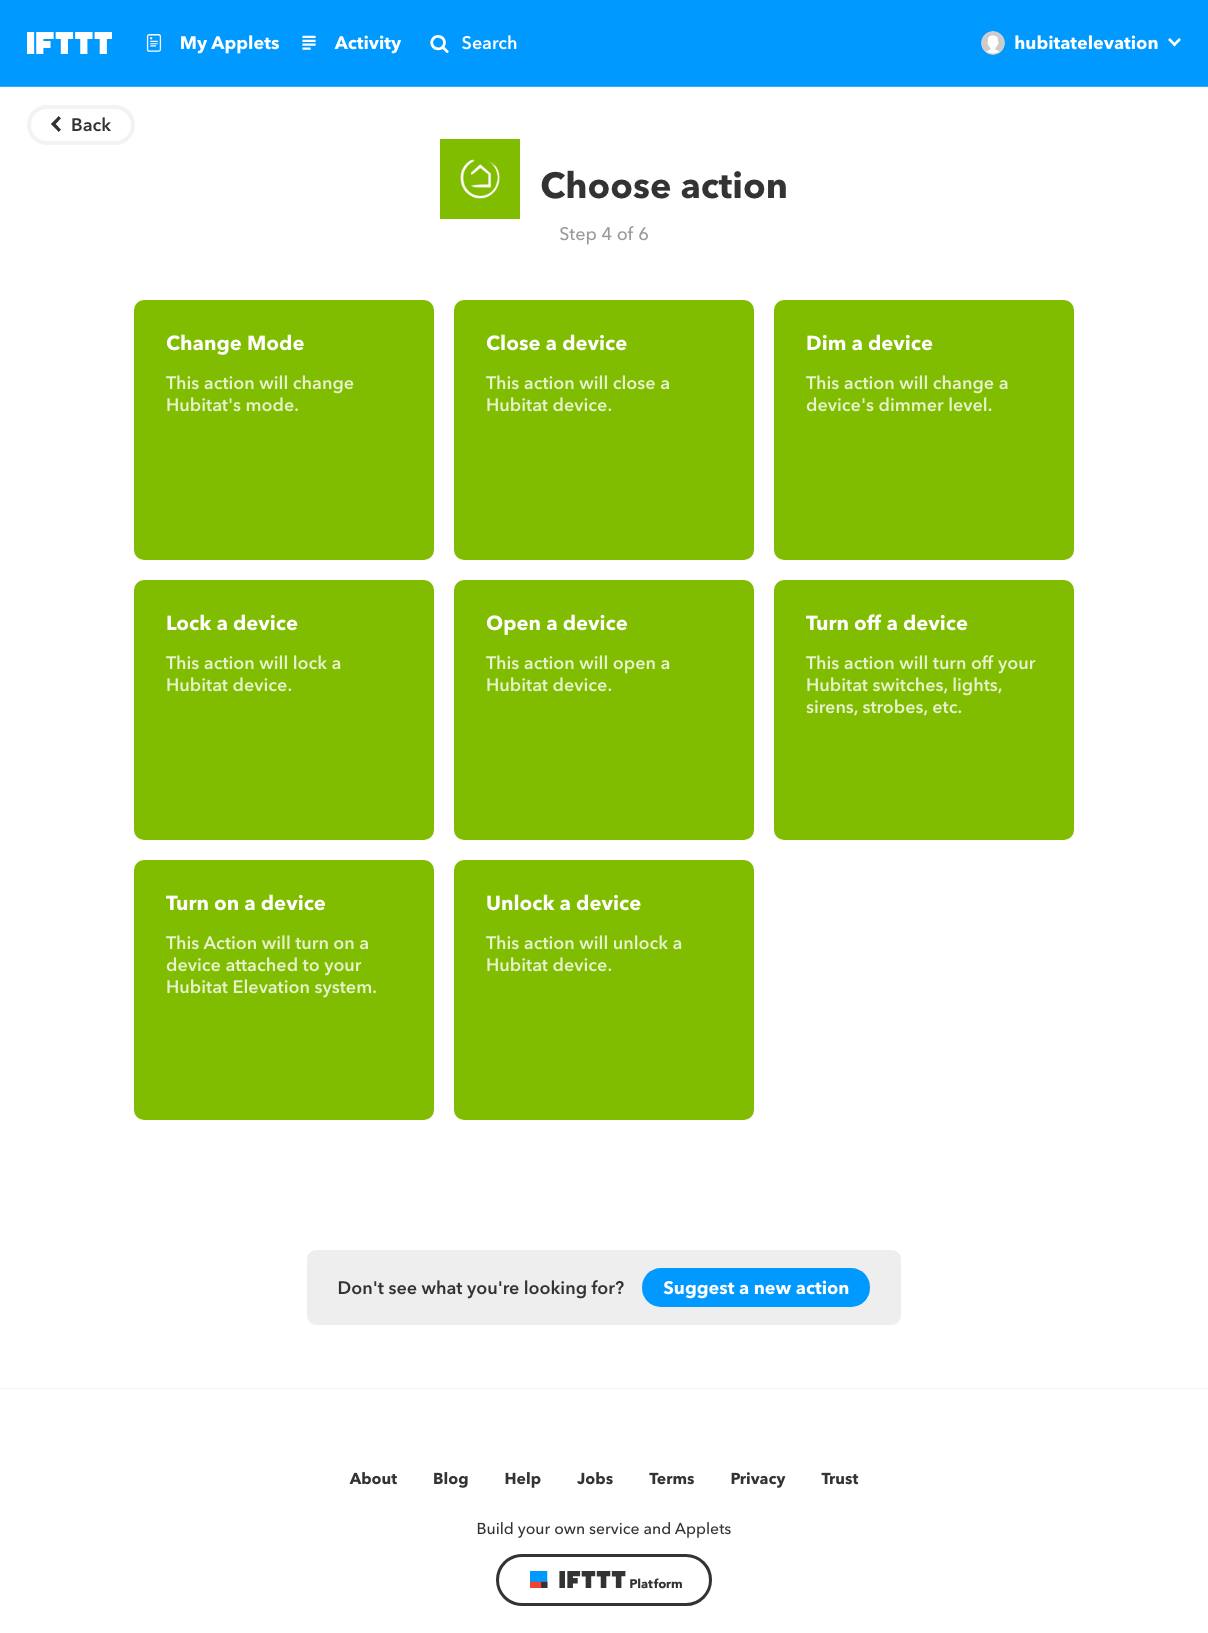 Screenshot of "Choose action" page in IFTTT